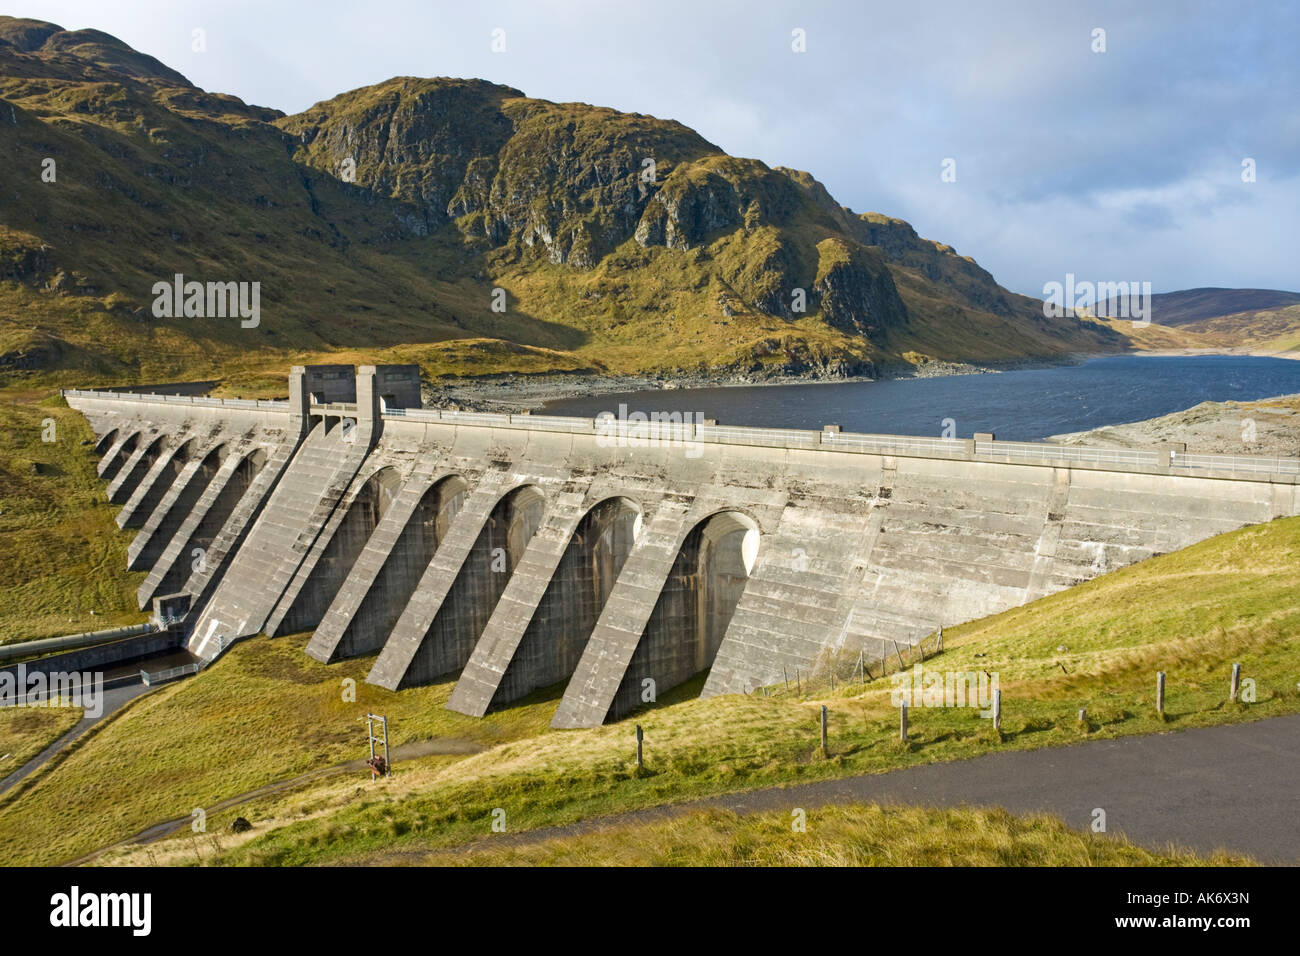 Hydro power dam at Lochan na Lairige situated between Tarmachan Ridge and Beinn Ghlas above Loch Tay in Tayside Scotland Stock Photo